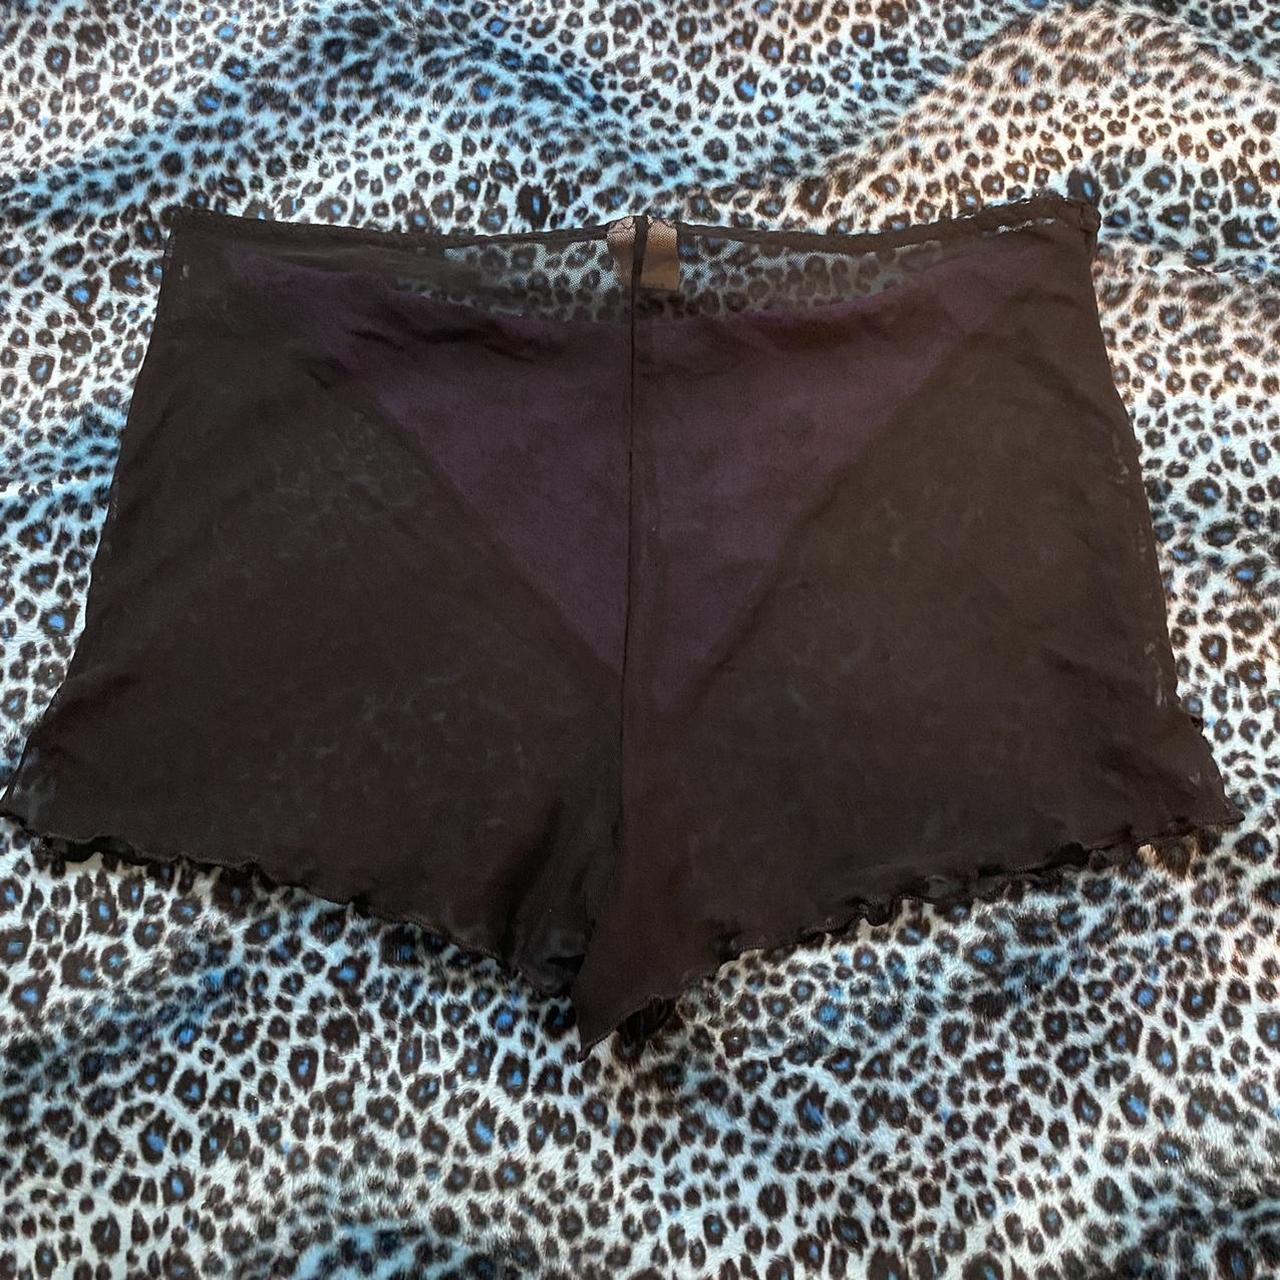 Vintage 90s sheer mesh booty shorts size large by... - Depop